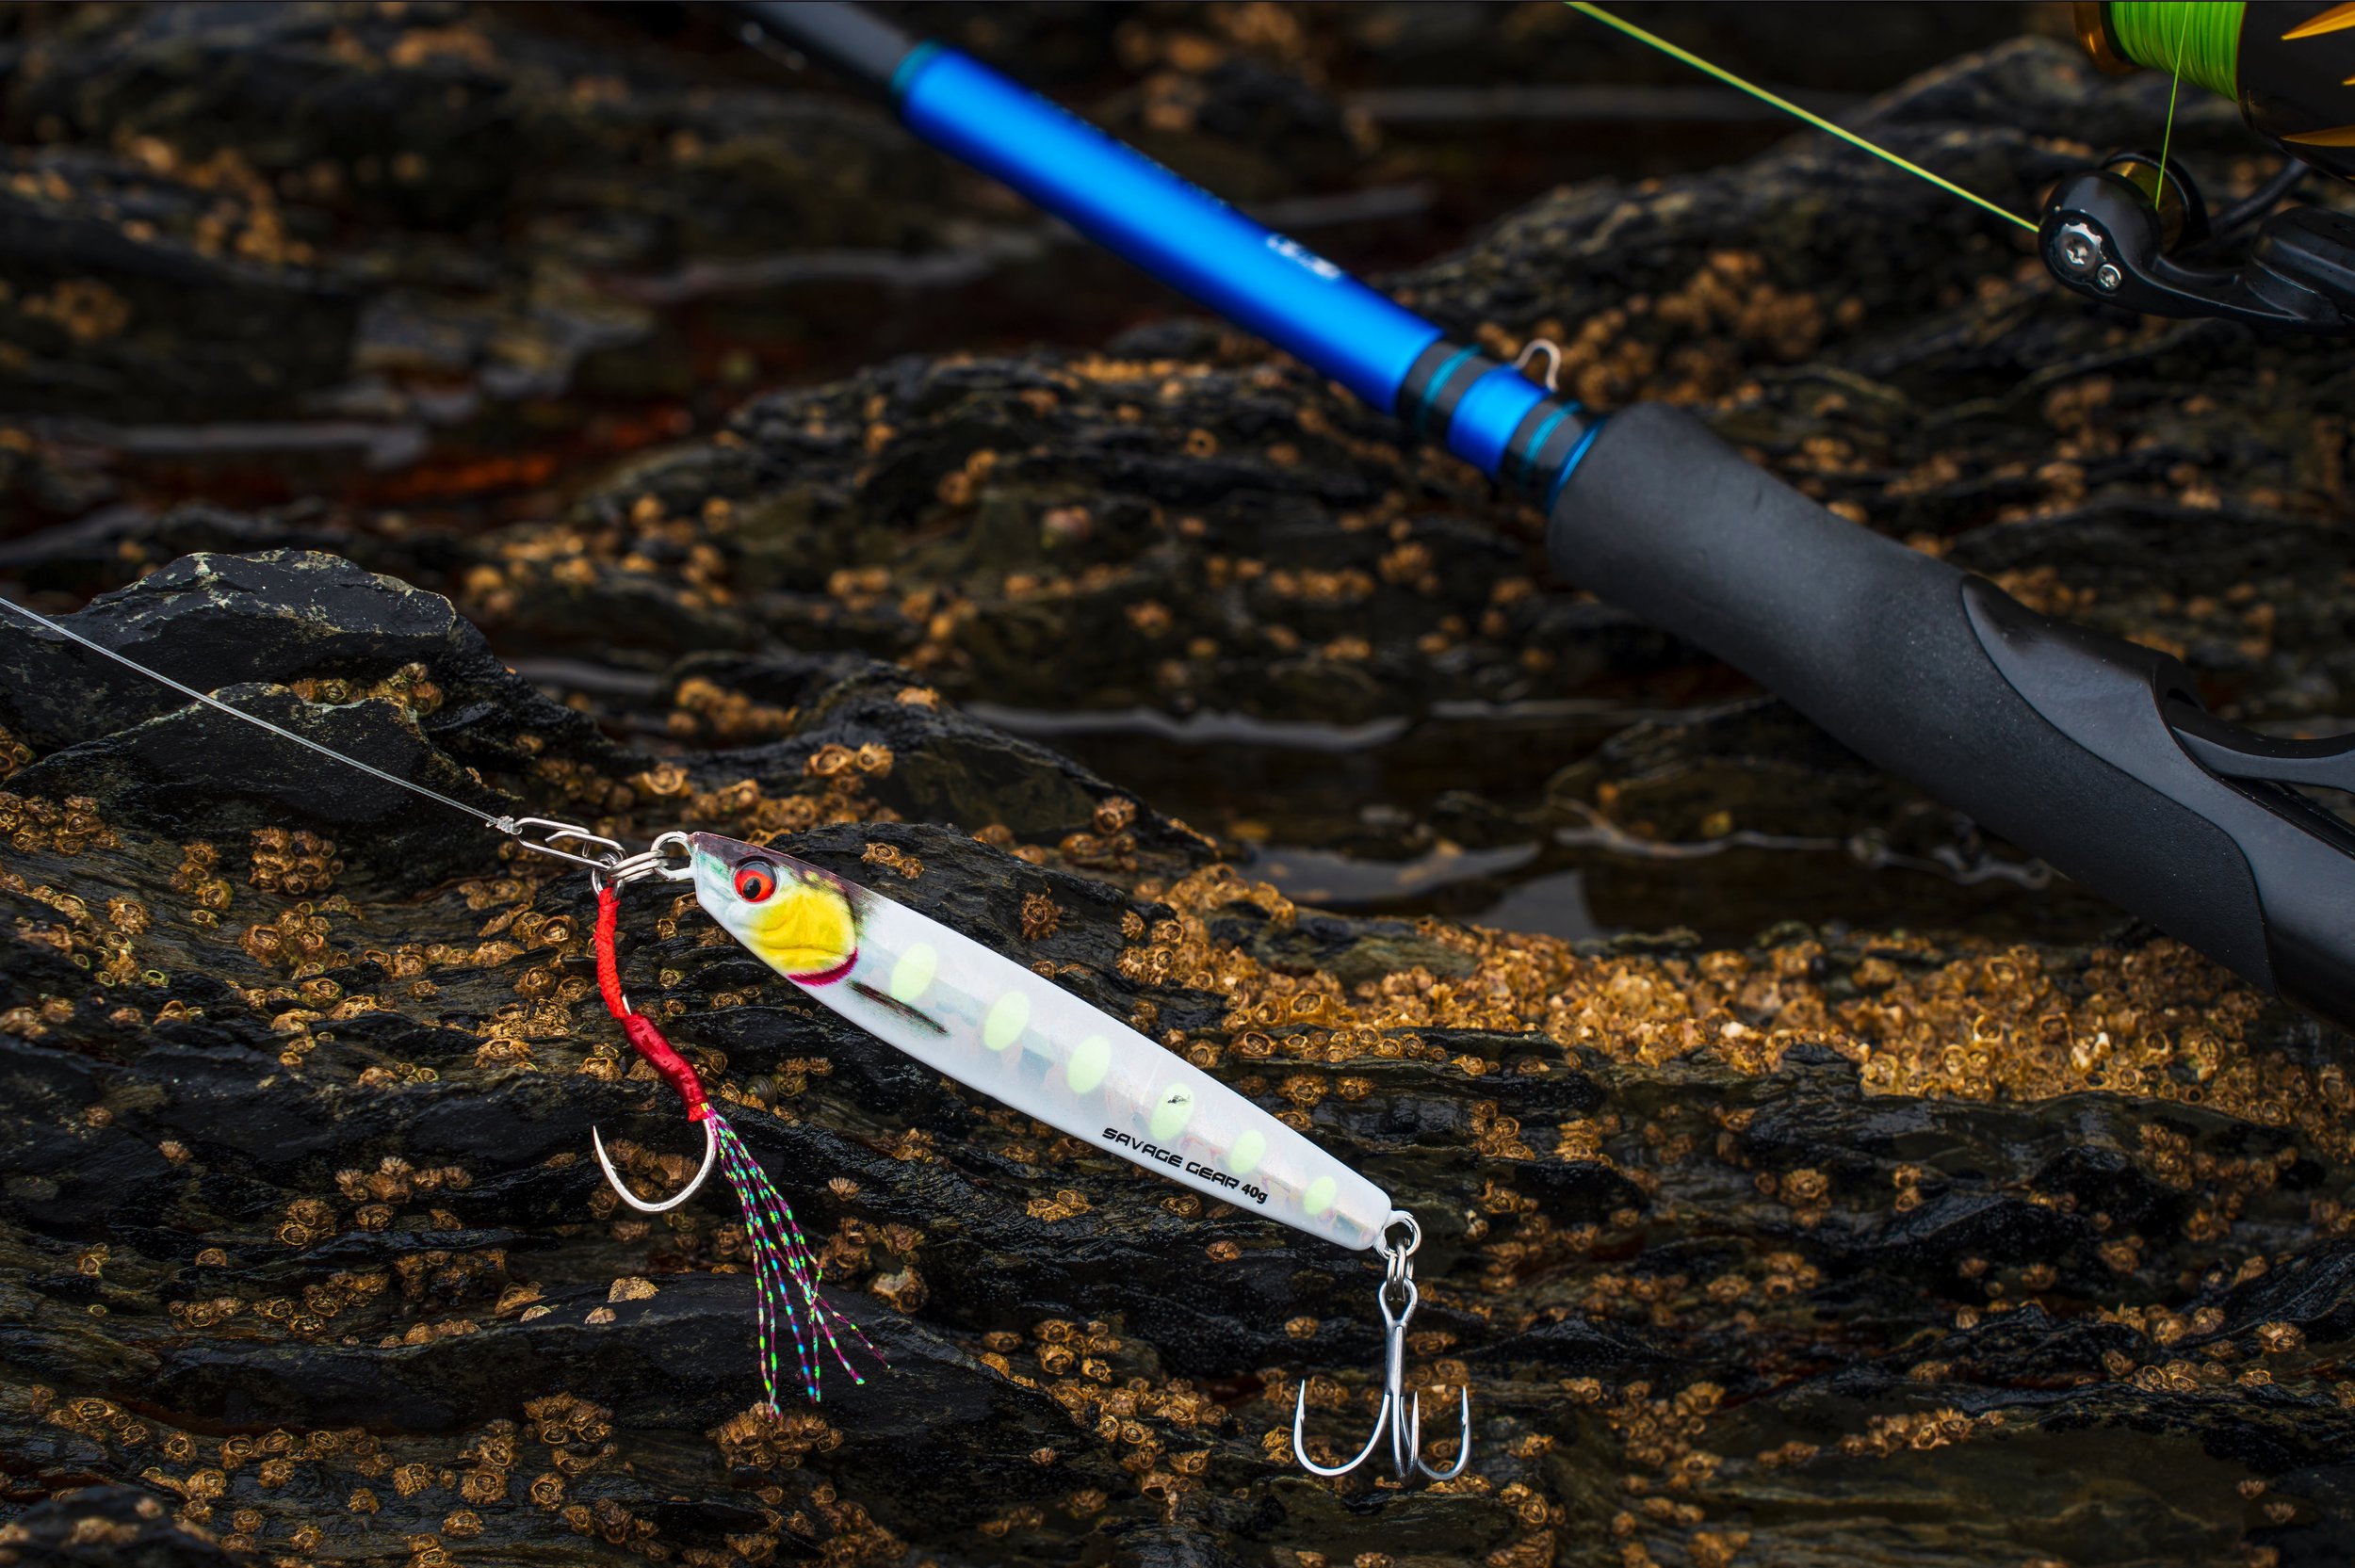 My go-to bass fishing lures — Henry Gilbey